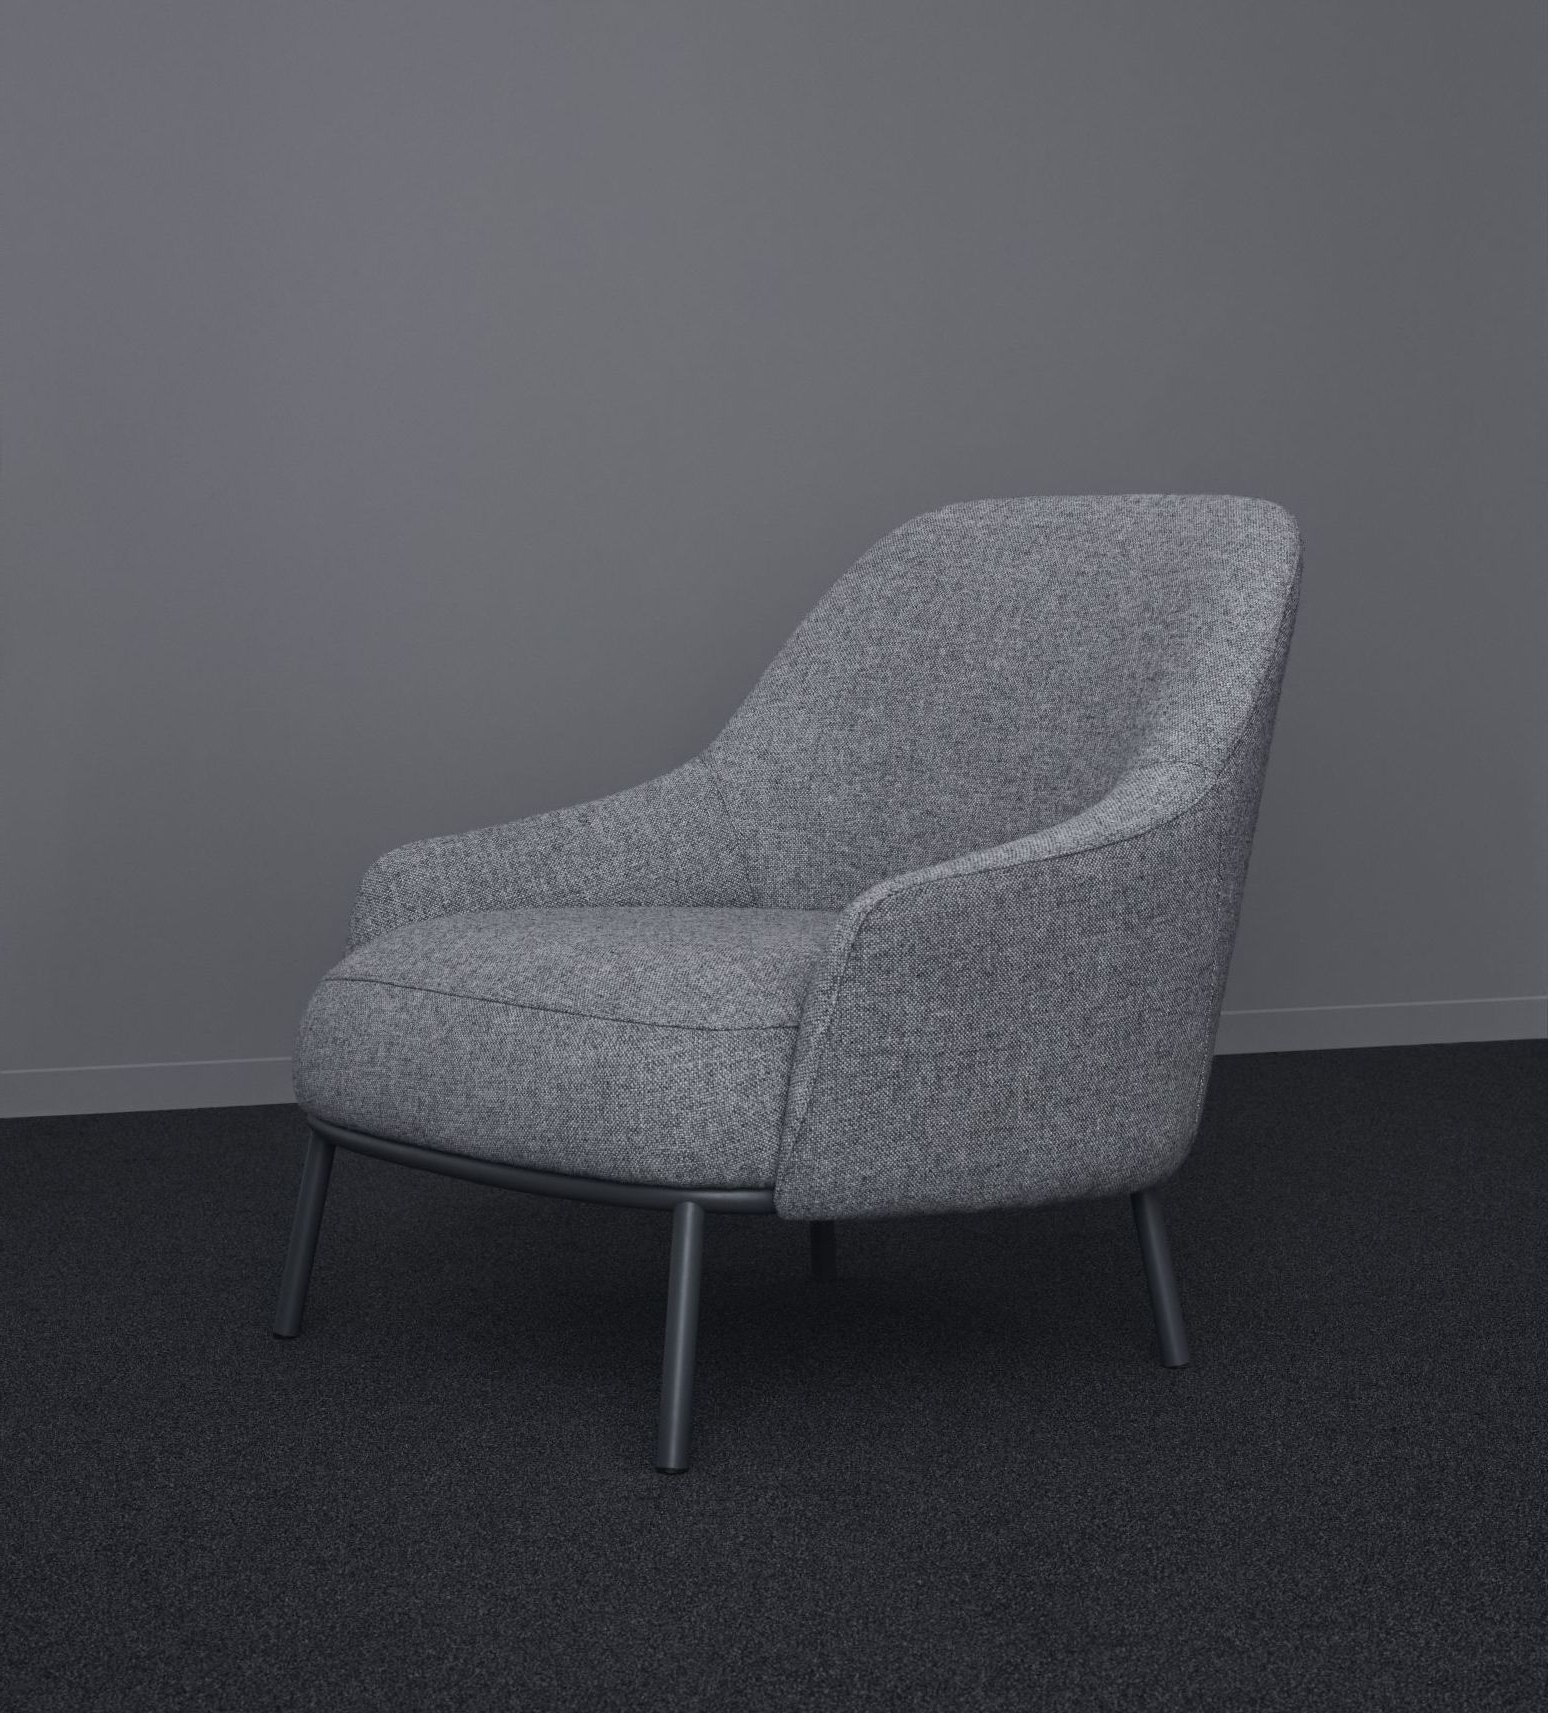 Shift easychair classic by Debiasi Sandri for Offecct